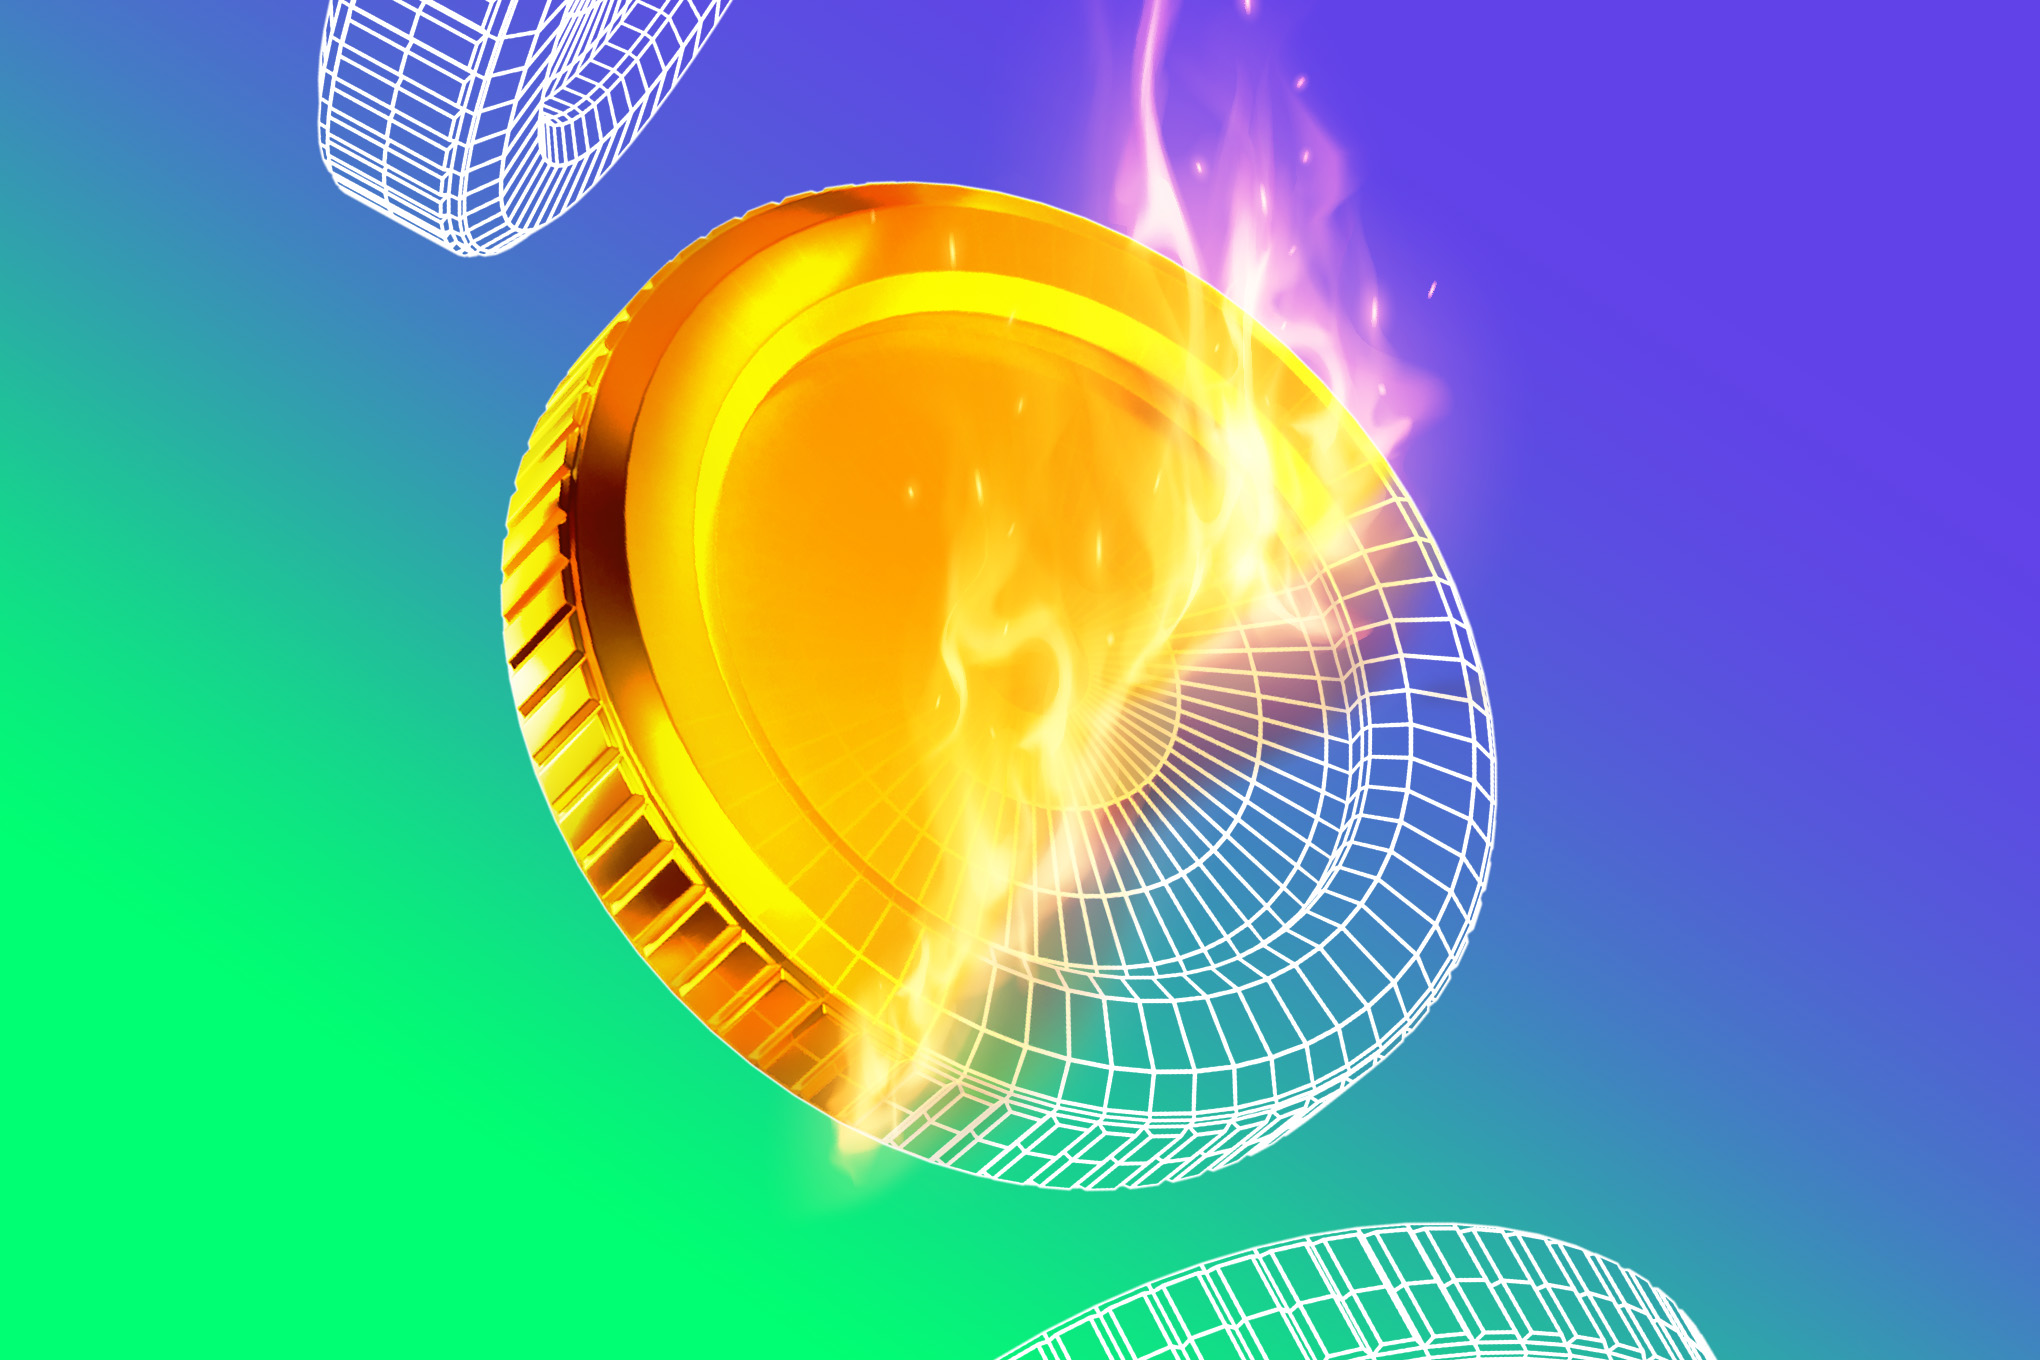 Illustration of a digital coin on fire.